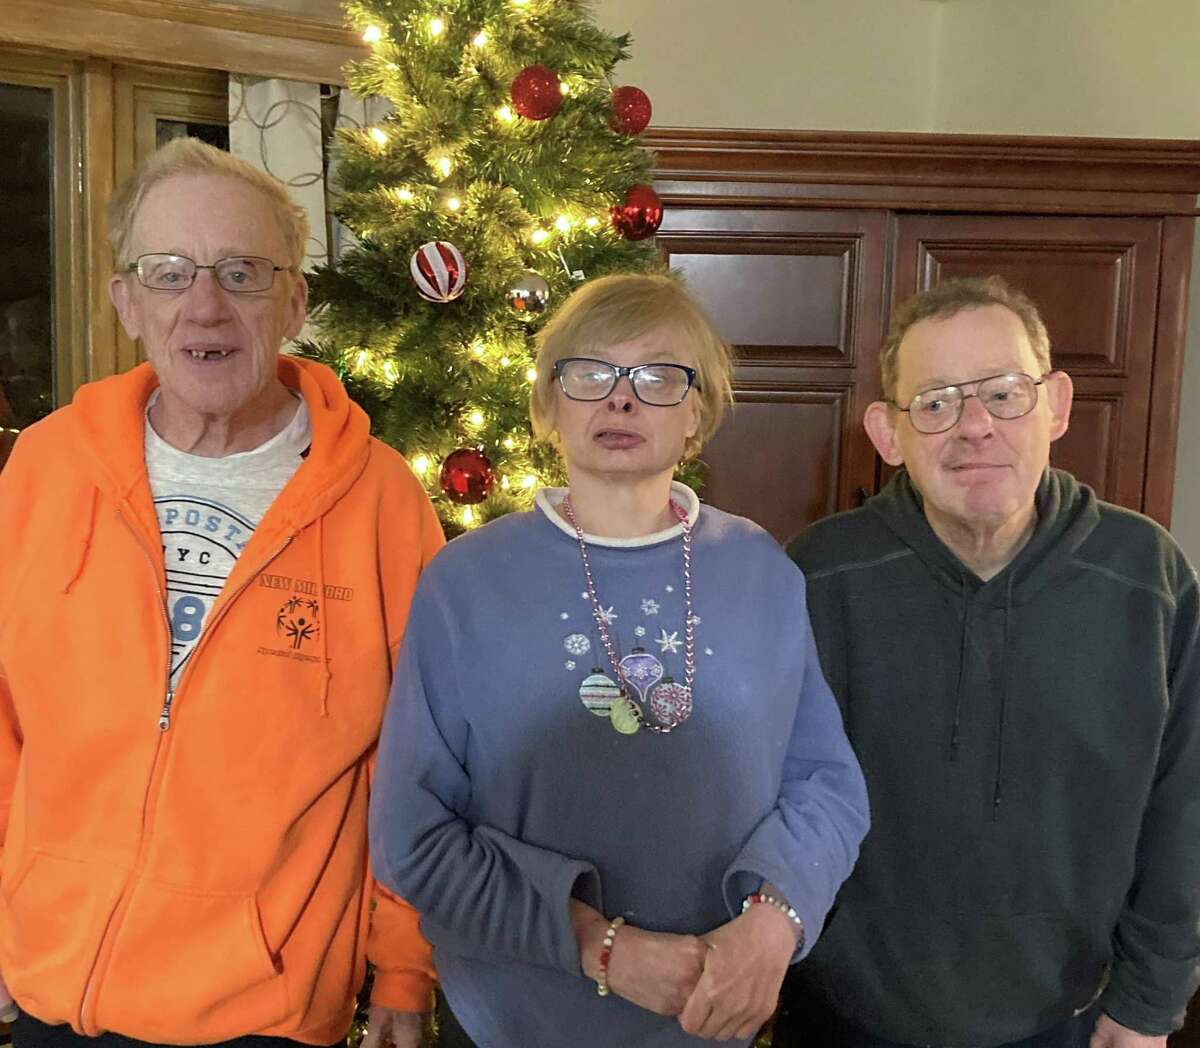 From left, Marty, Tommy, and Kathryn celebrate Christmas at the Ability Beyond home in New Milford